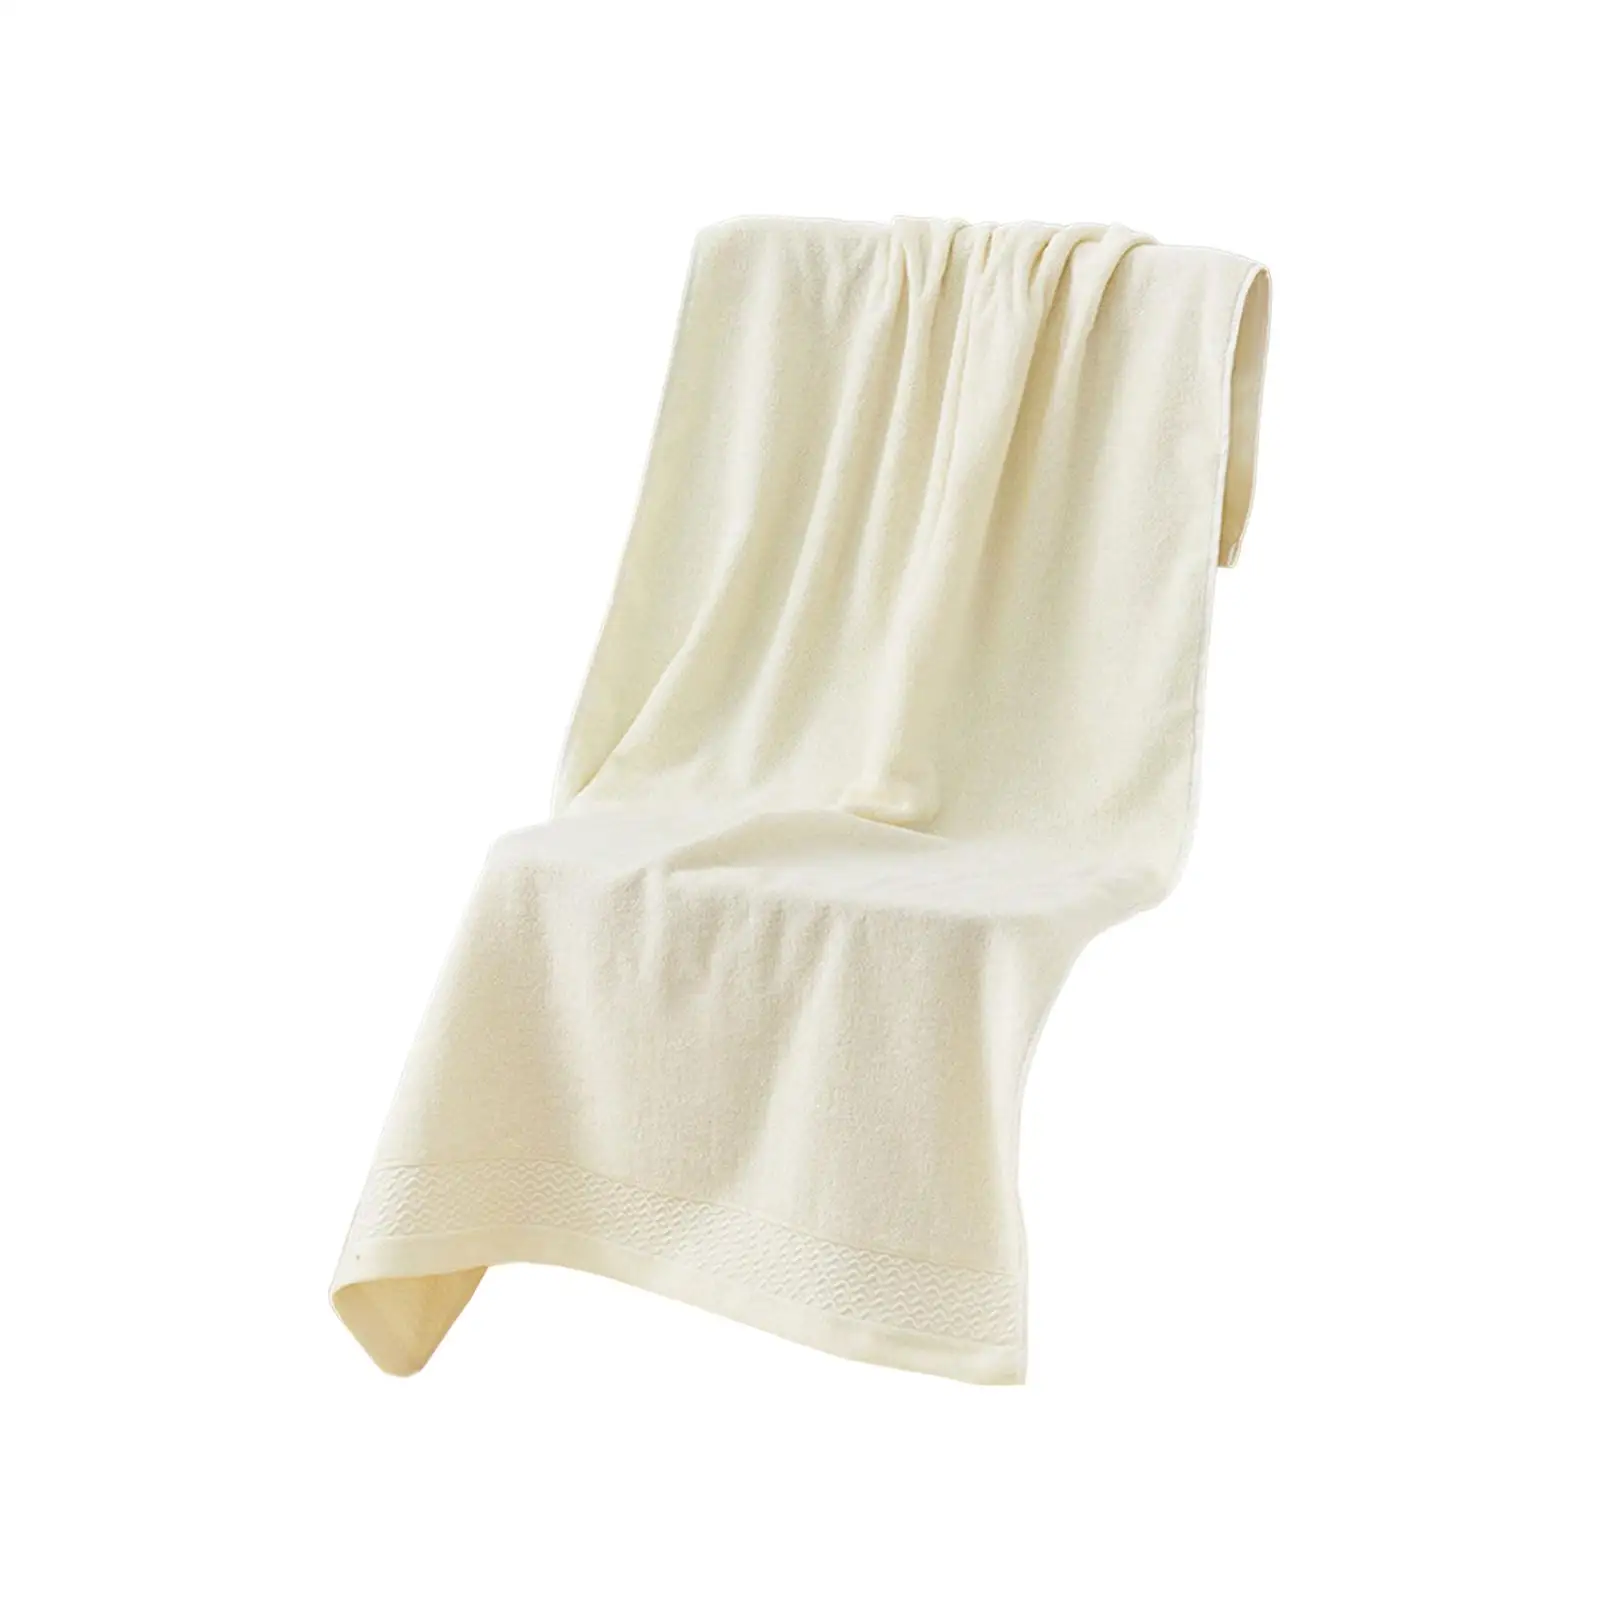 Bath Towels Quick Drying Machine Washable 140Cmx70cm Highly Absorbent Beach Towels for Guests Gyms Beach SPA Pool